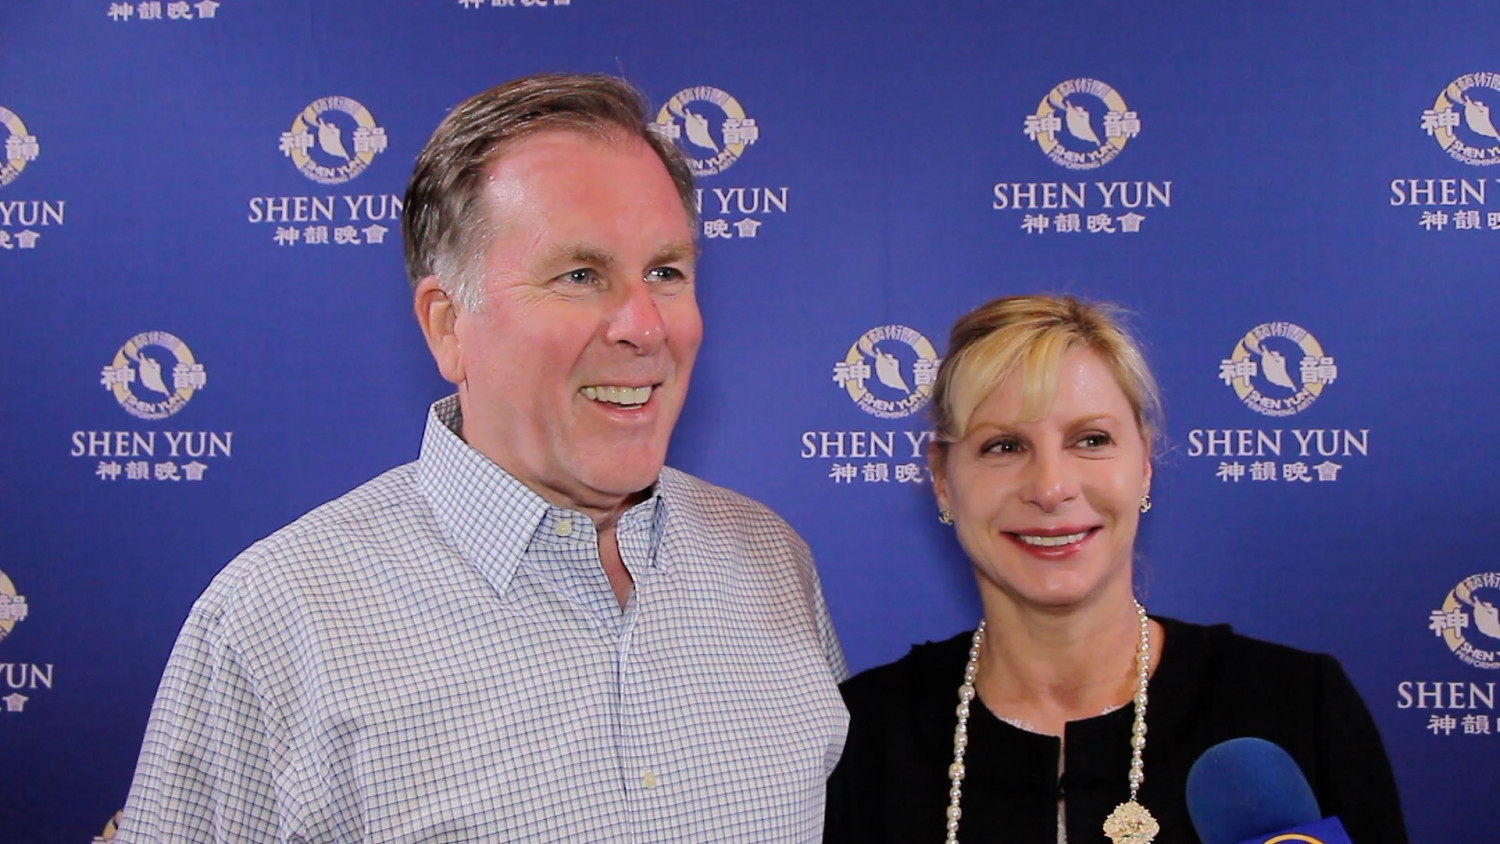 After 13 Years of Waiting, Managing Partner Left Impressed With Shen Yun’s Production